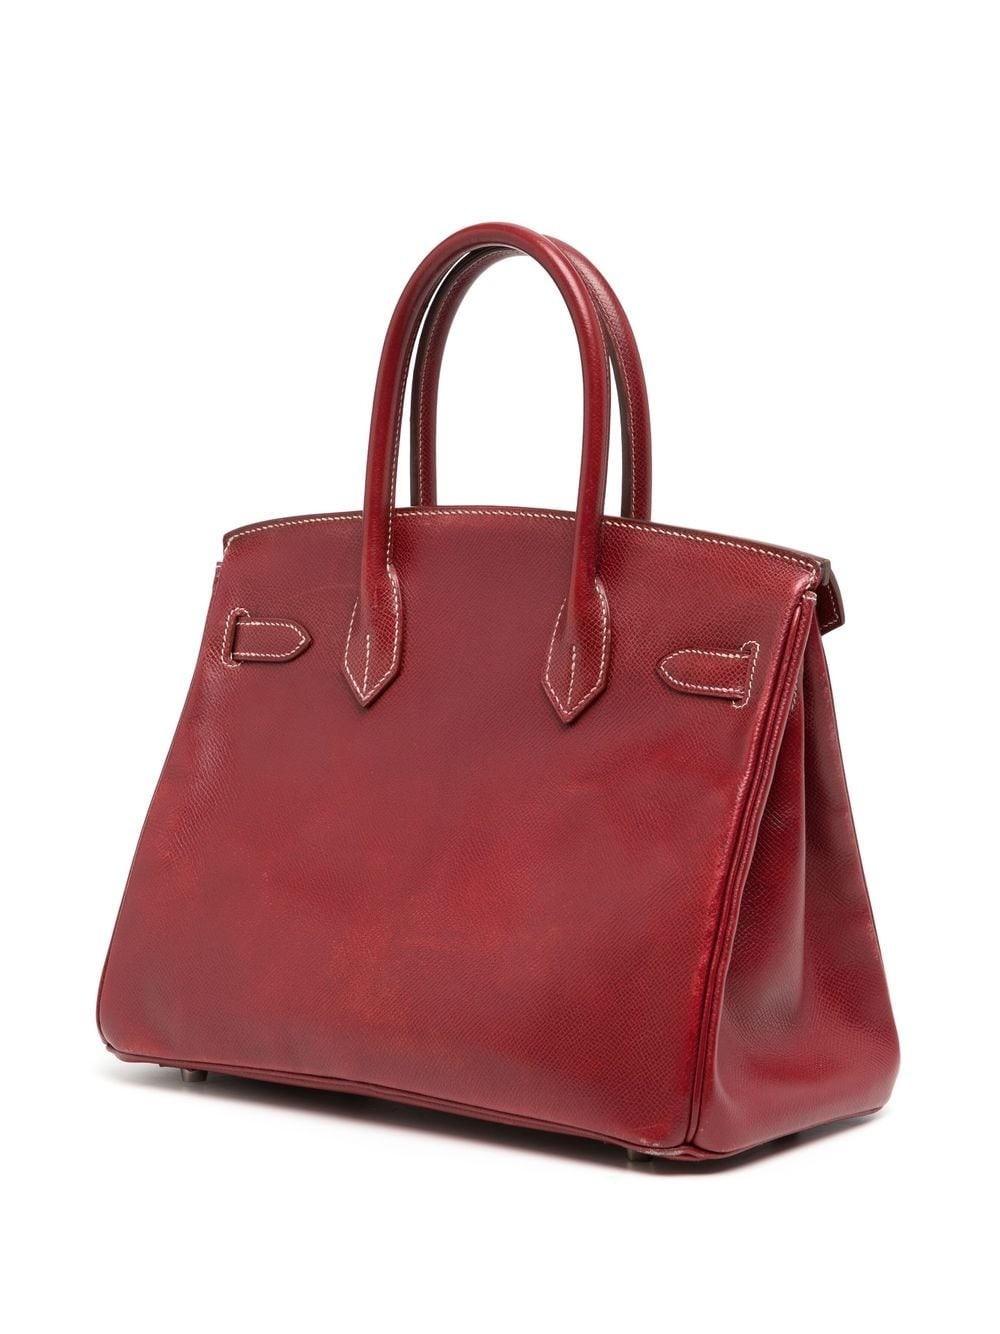 In a beautiful red burgundy colour, the courchevel leather adds the perfect balance of shine and texture for this 30cm Birkin. Made in 2001, this piece has truly maintained its quality, however it does show some wear on the bottom corners. Some